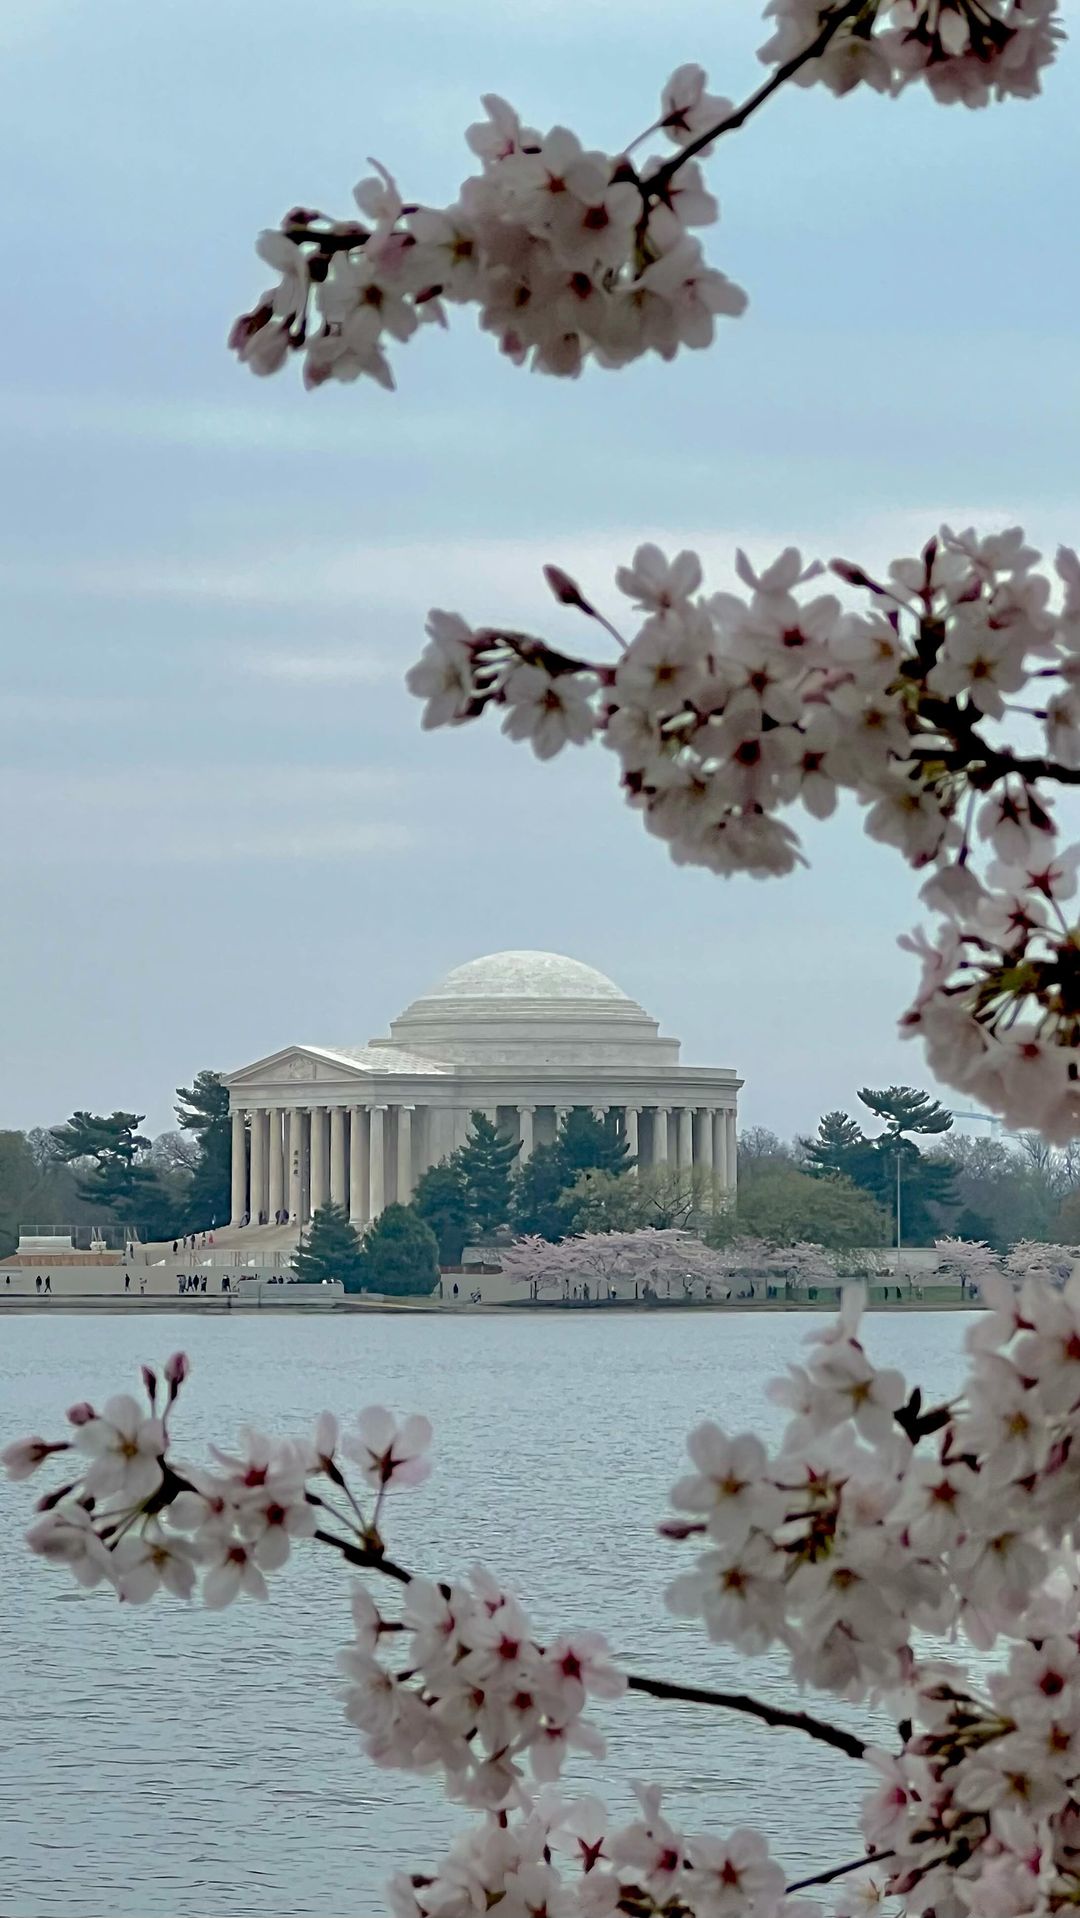 Historical Landmarks and Culinary Delights in Washington, D.C. and Beyond